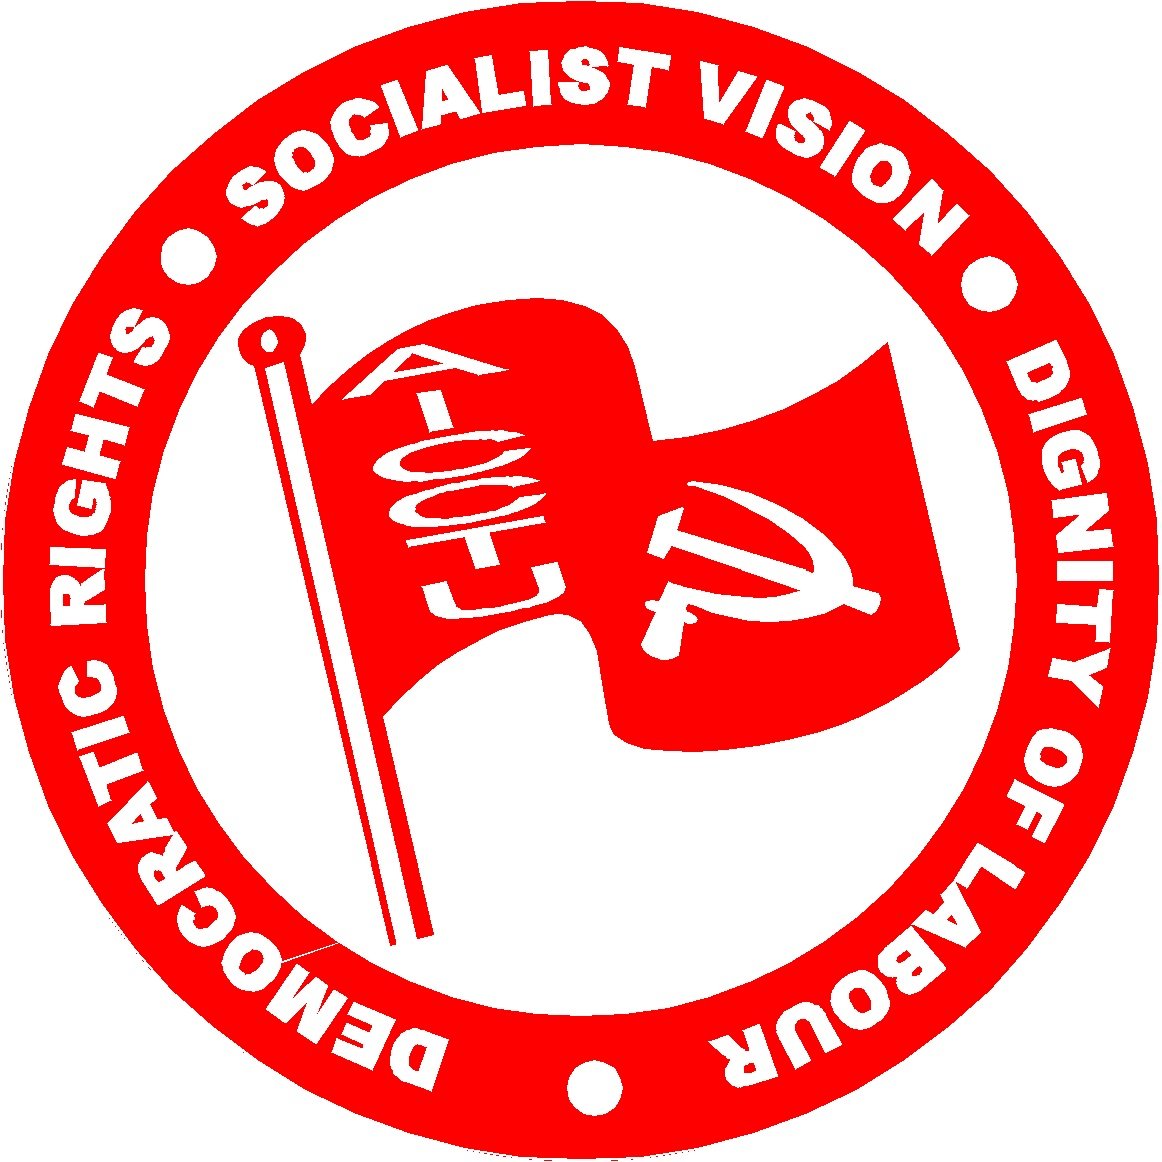 Official twitter handle of All India Central Council of Trade Unions headquarter. We are a Central Trade Union organizing the Indian working class.